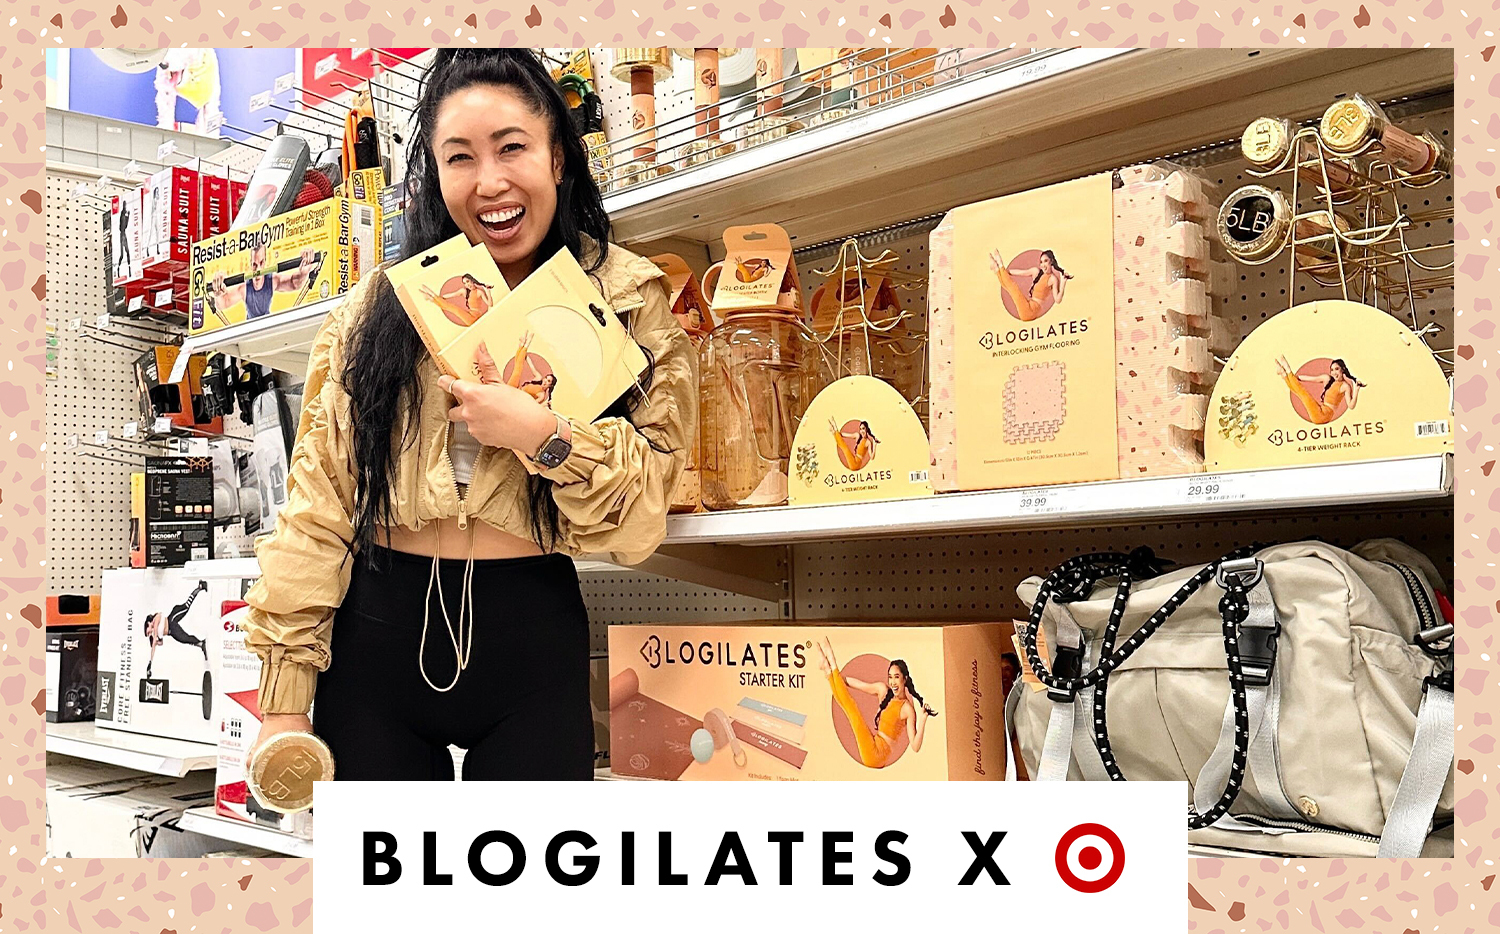 Come see what's new at Blogilates x Target! - Blogilates